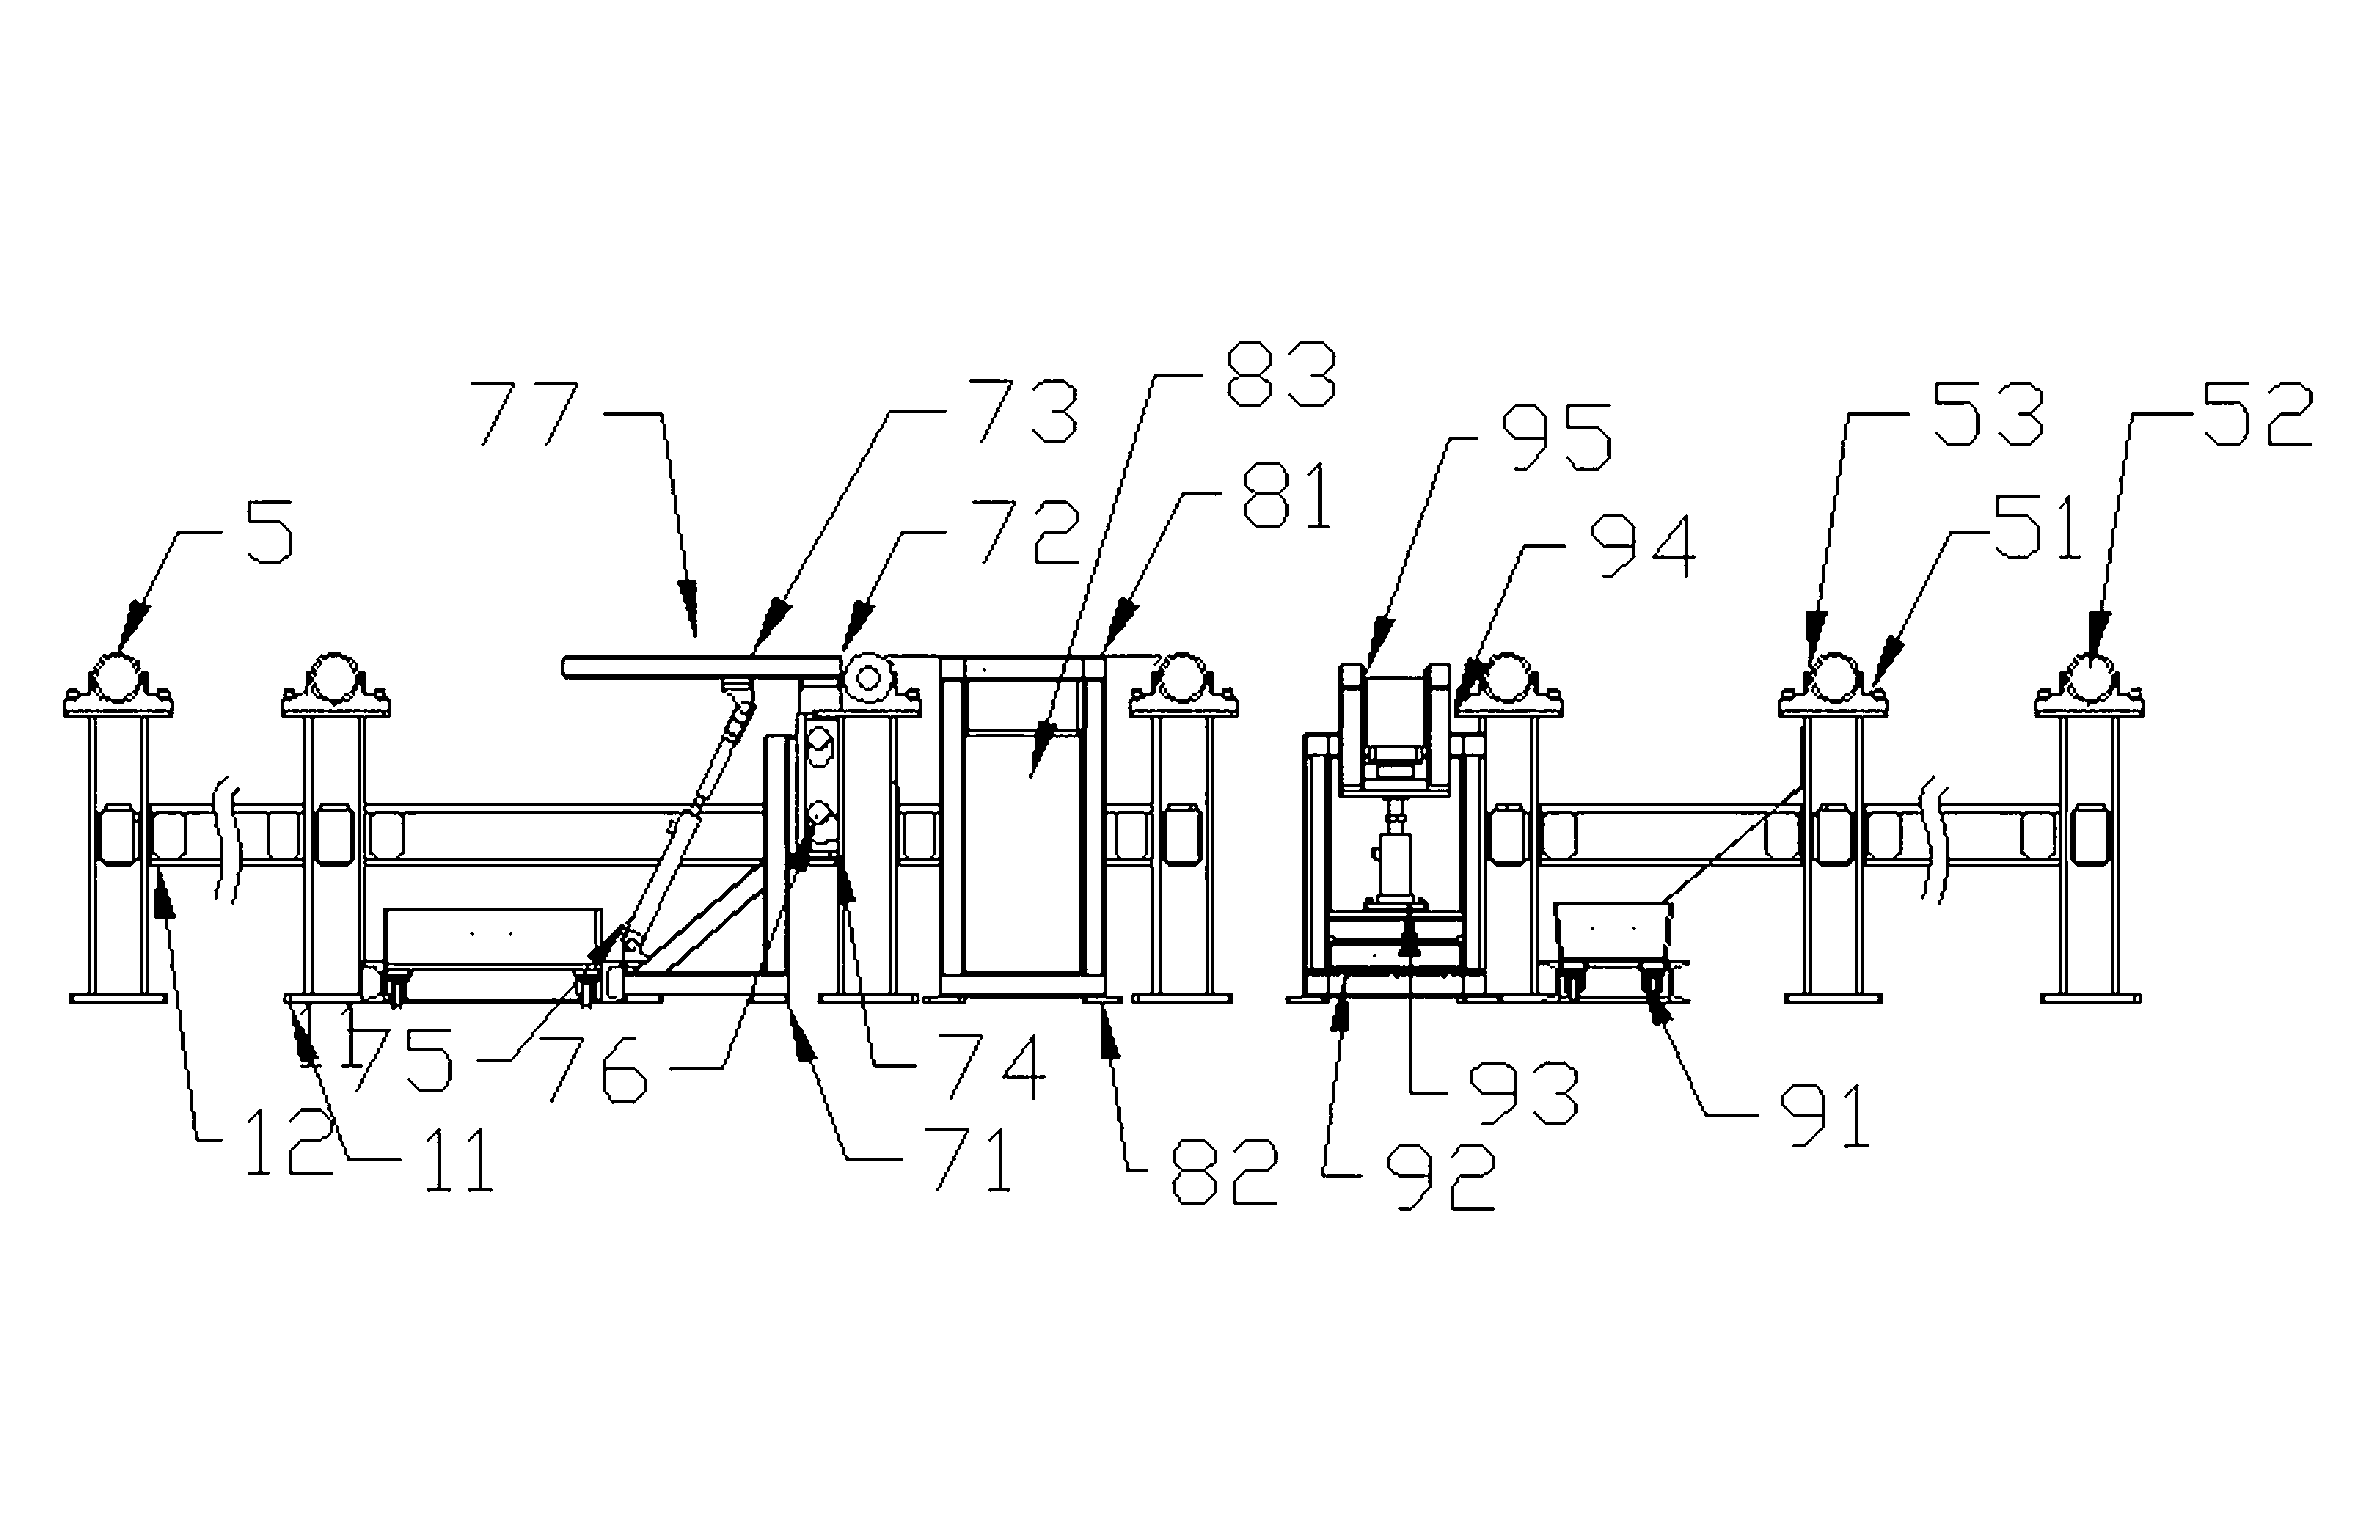 Compound type numerically-controlled machine tool